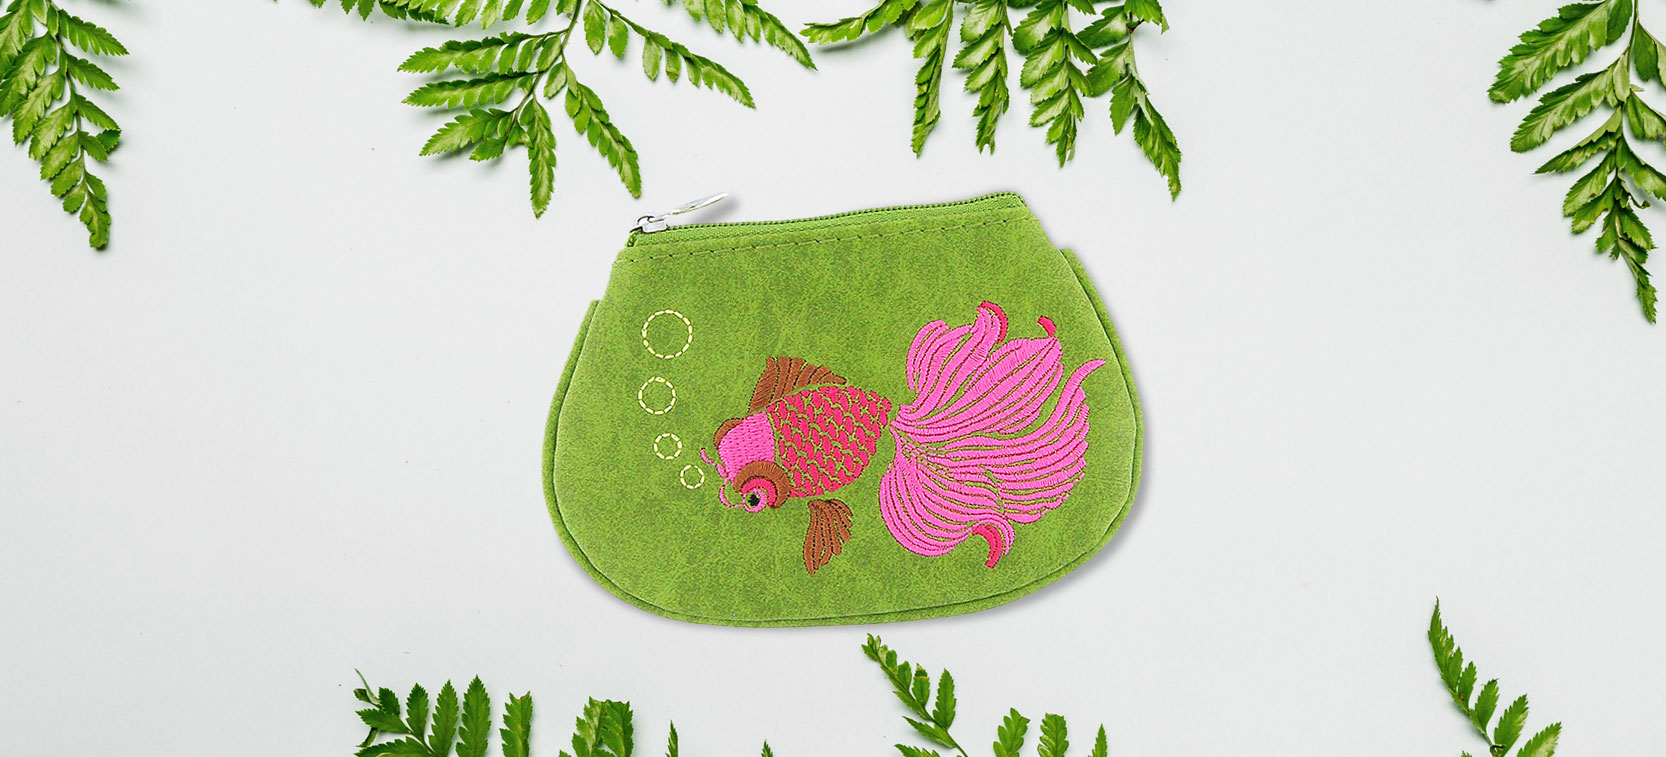 LAVISHY design and wholesale good luck/lucky fish themed vegan accessories and gfits to gift shops, boutiques and book stores in Canada, USA and worldwide.